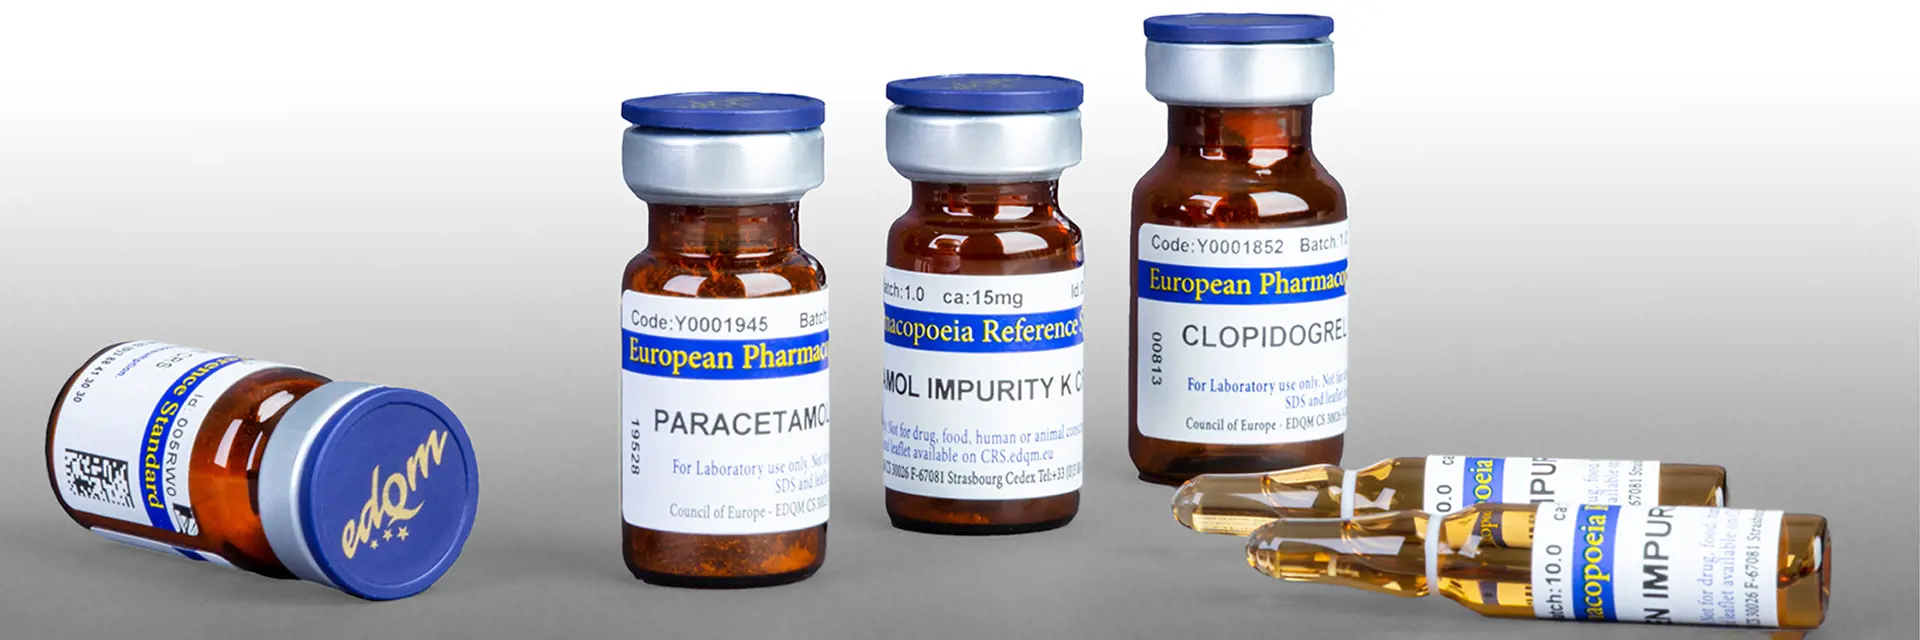 Brown glass vials and ampoules containing primary reference standards from the European Pharmacopoeia. The caps are blue with EDQM in gold print and the labels are white, blue and yellow.